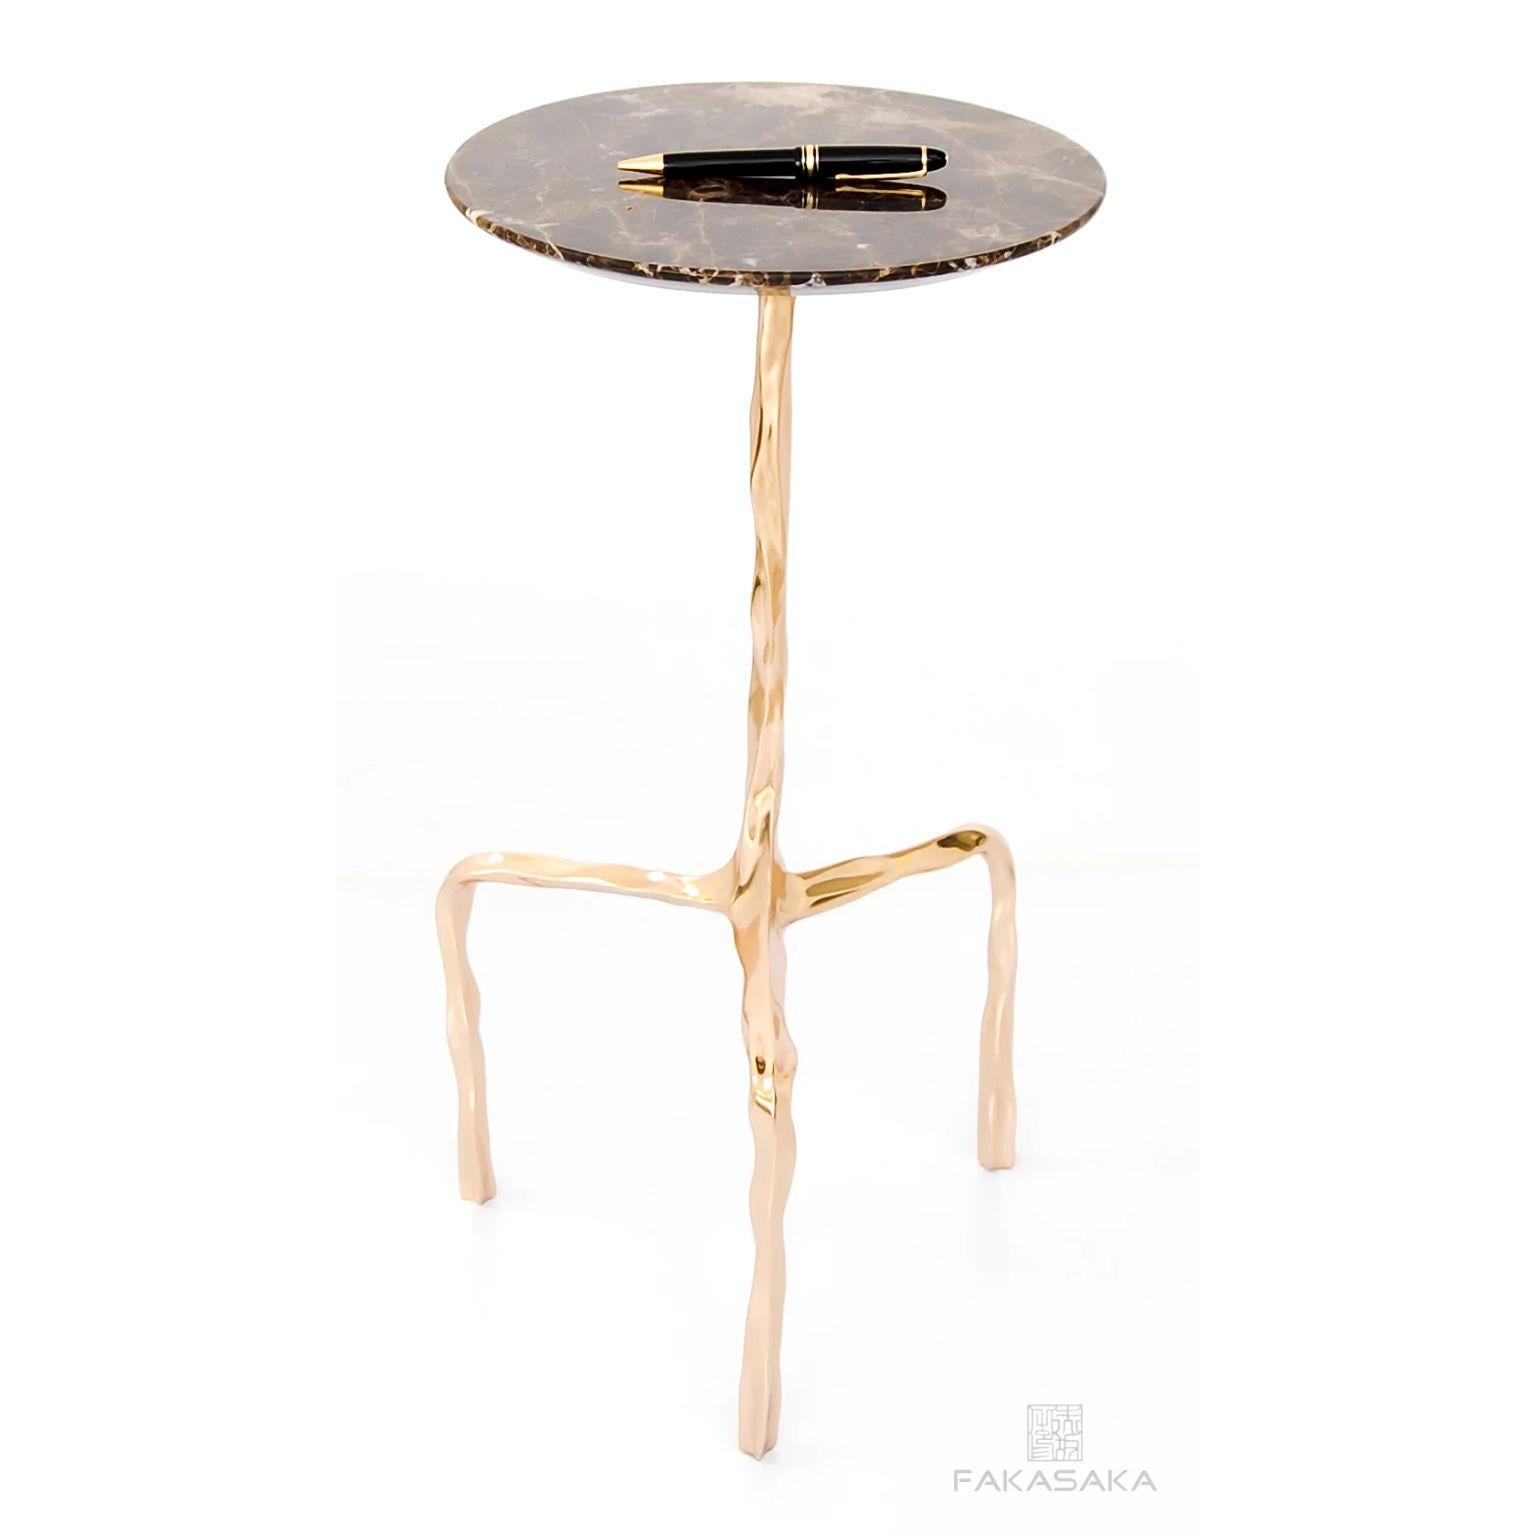 Brazilian Aretha Drink Table with Marrom Imperial Marble Top by Fakasaka Design For Sale